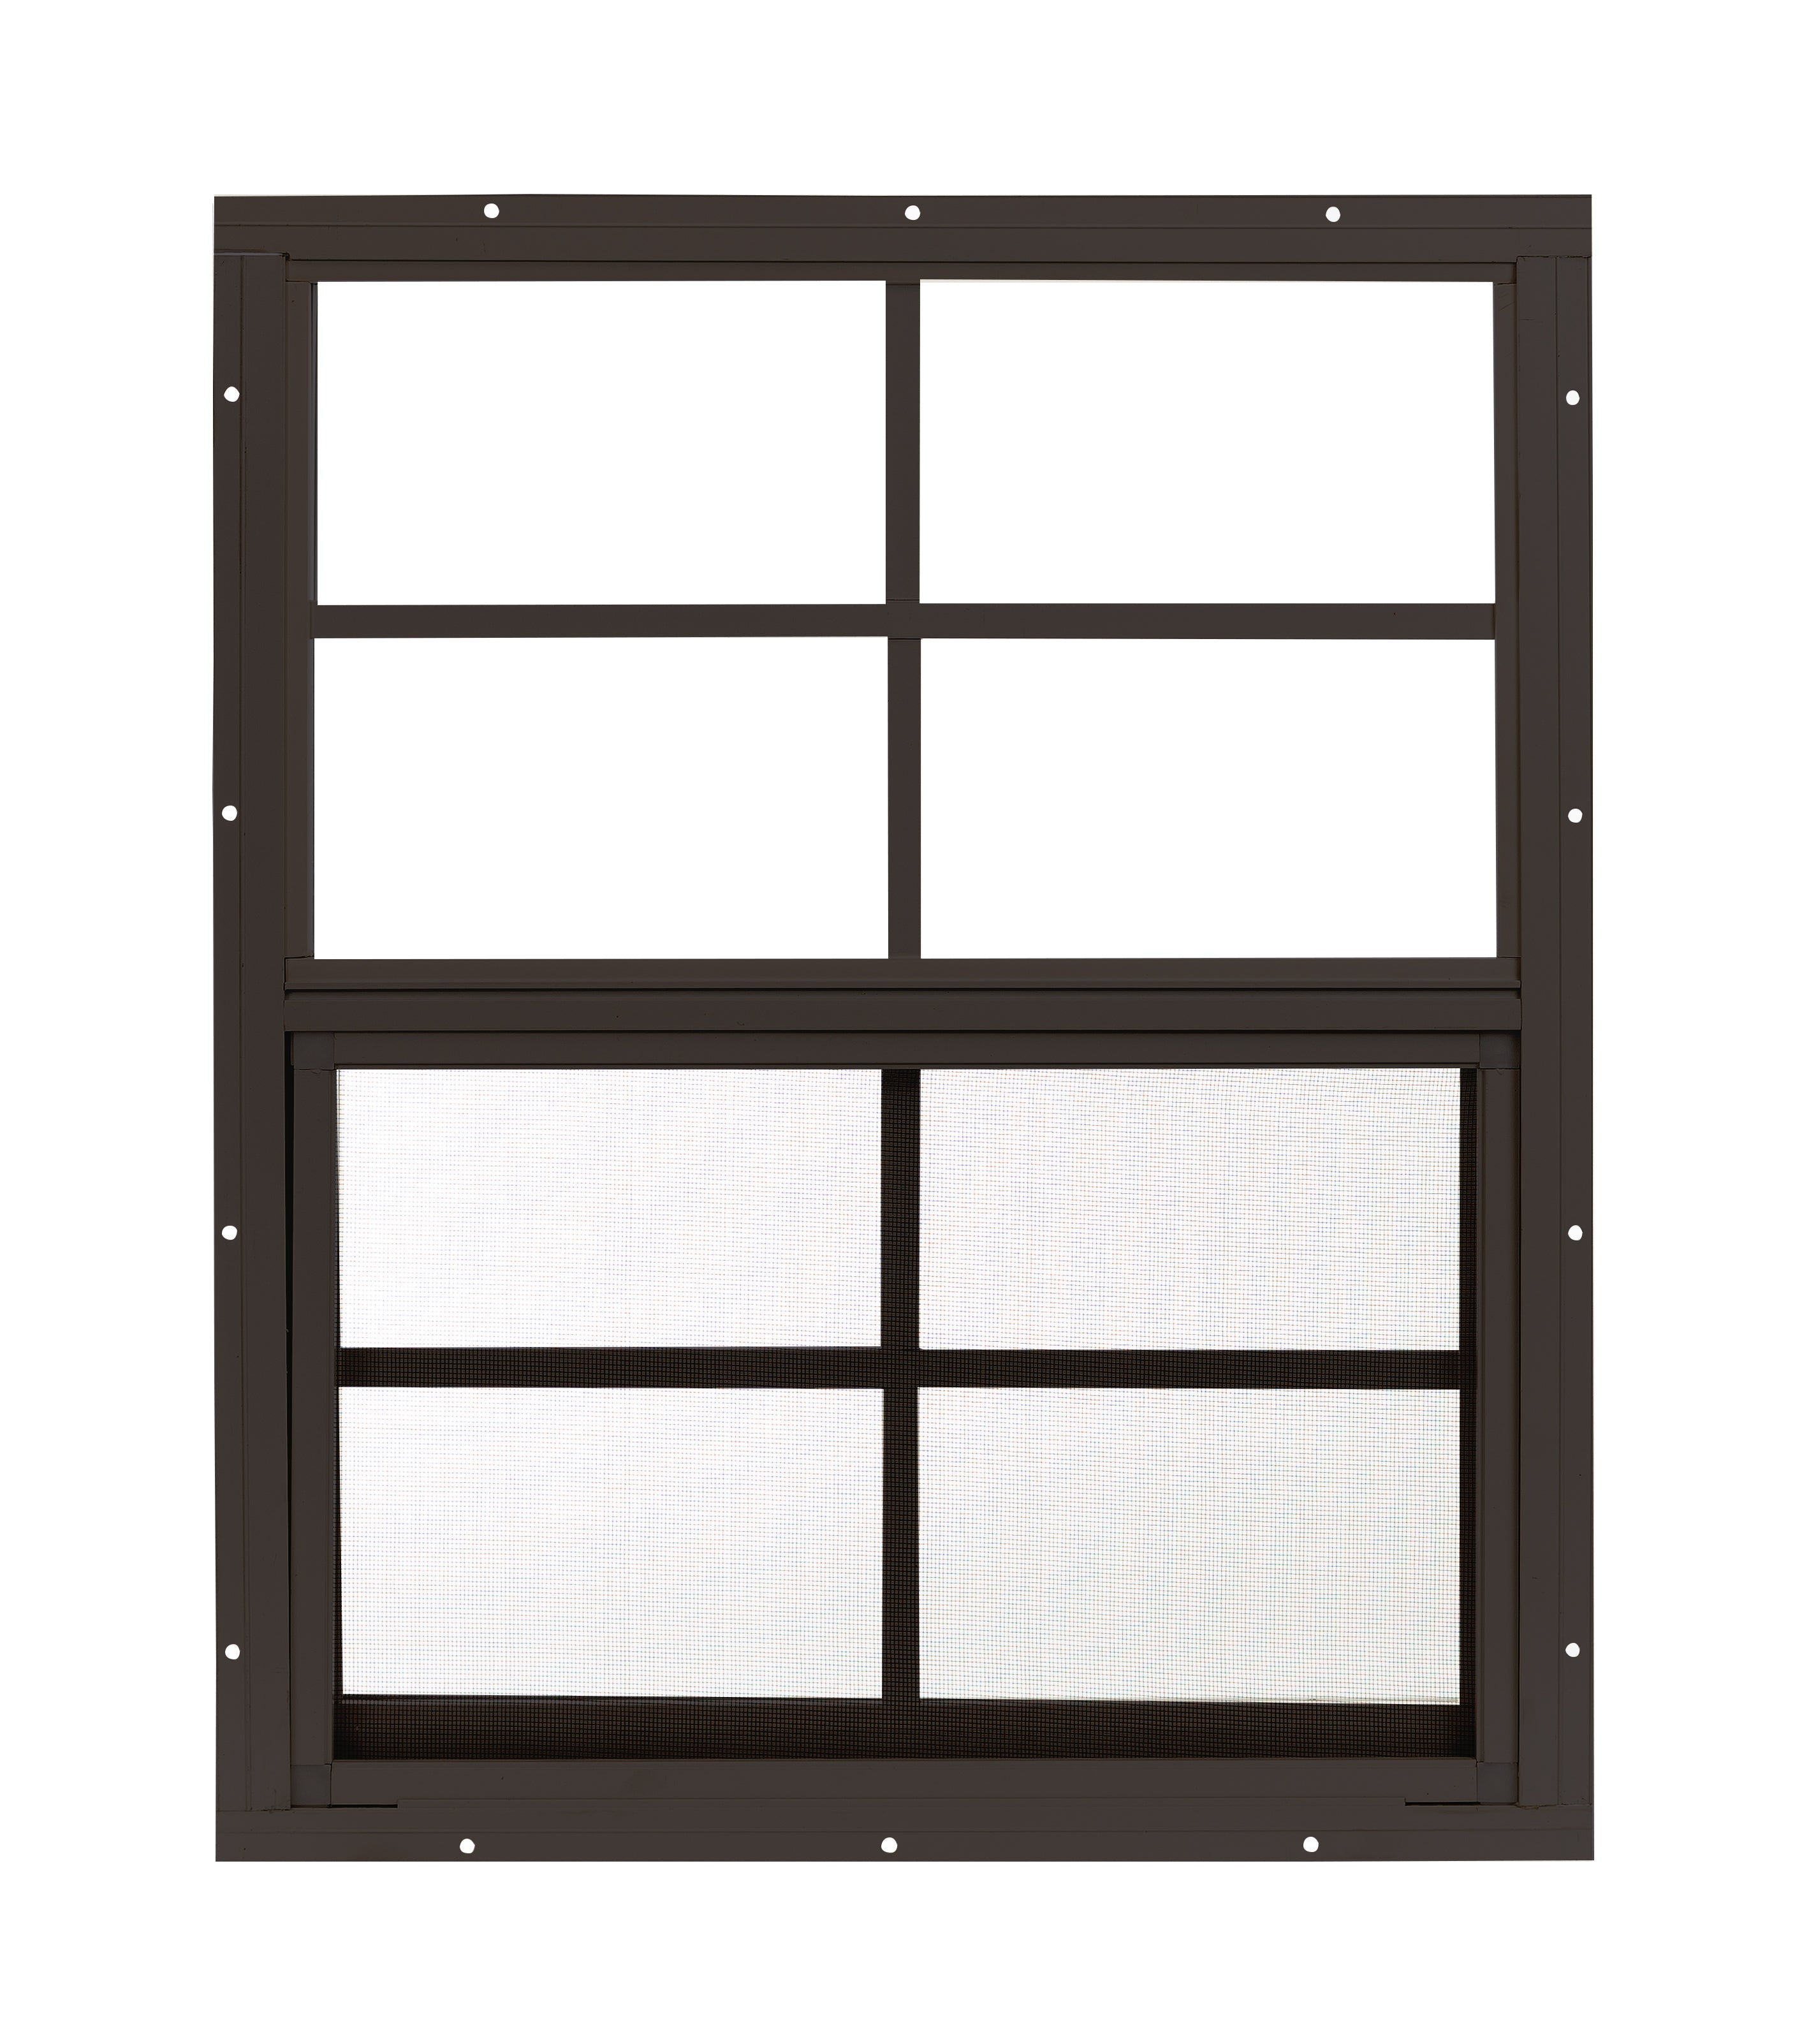 18" W x 23" H Single Hung Flush Mount Brown Window for Sheds, Playhouses, and MORE